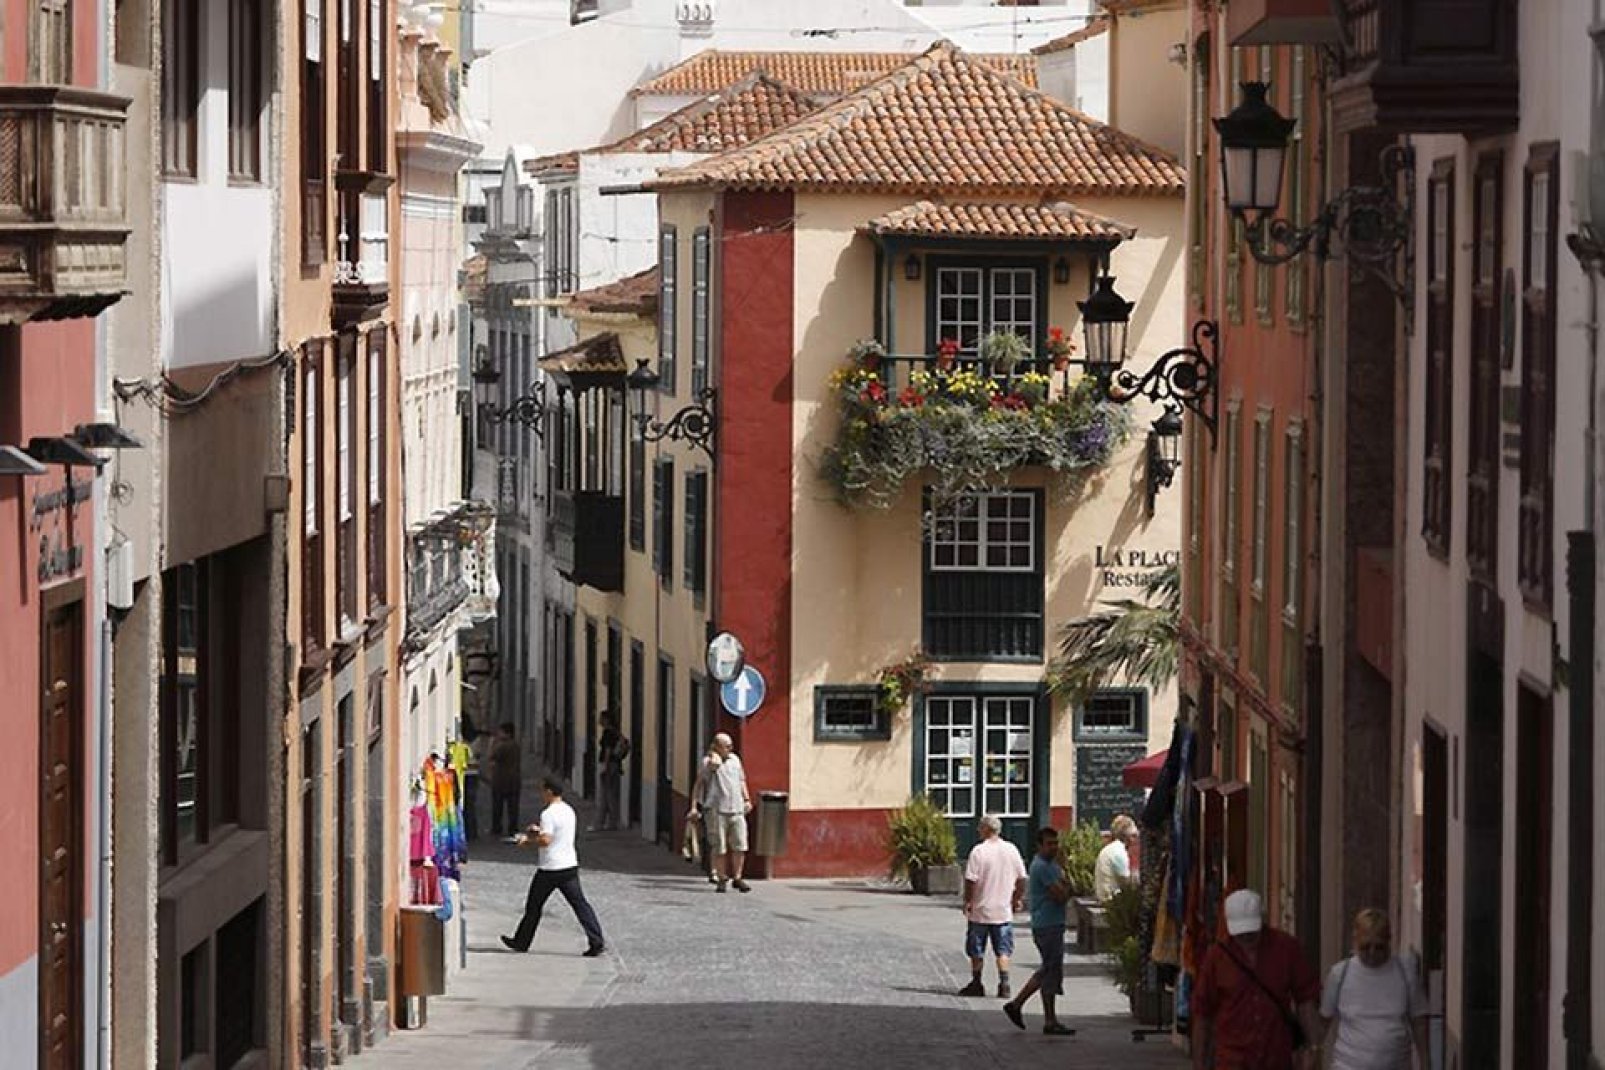 Don't miss Calle San Sebastian street, which is at the heart of an area whose buildings and cultural life are typical to the island.